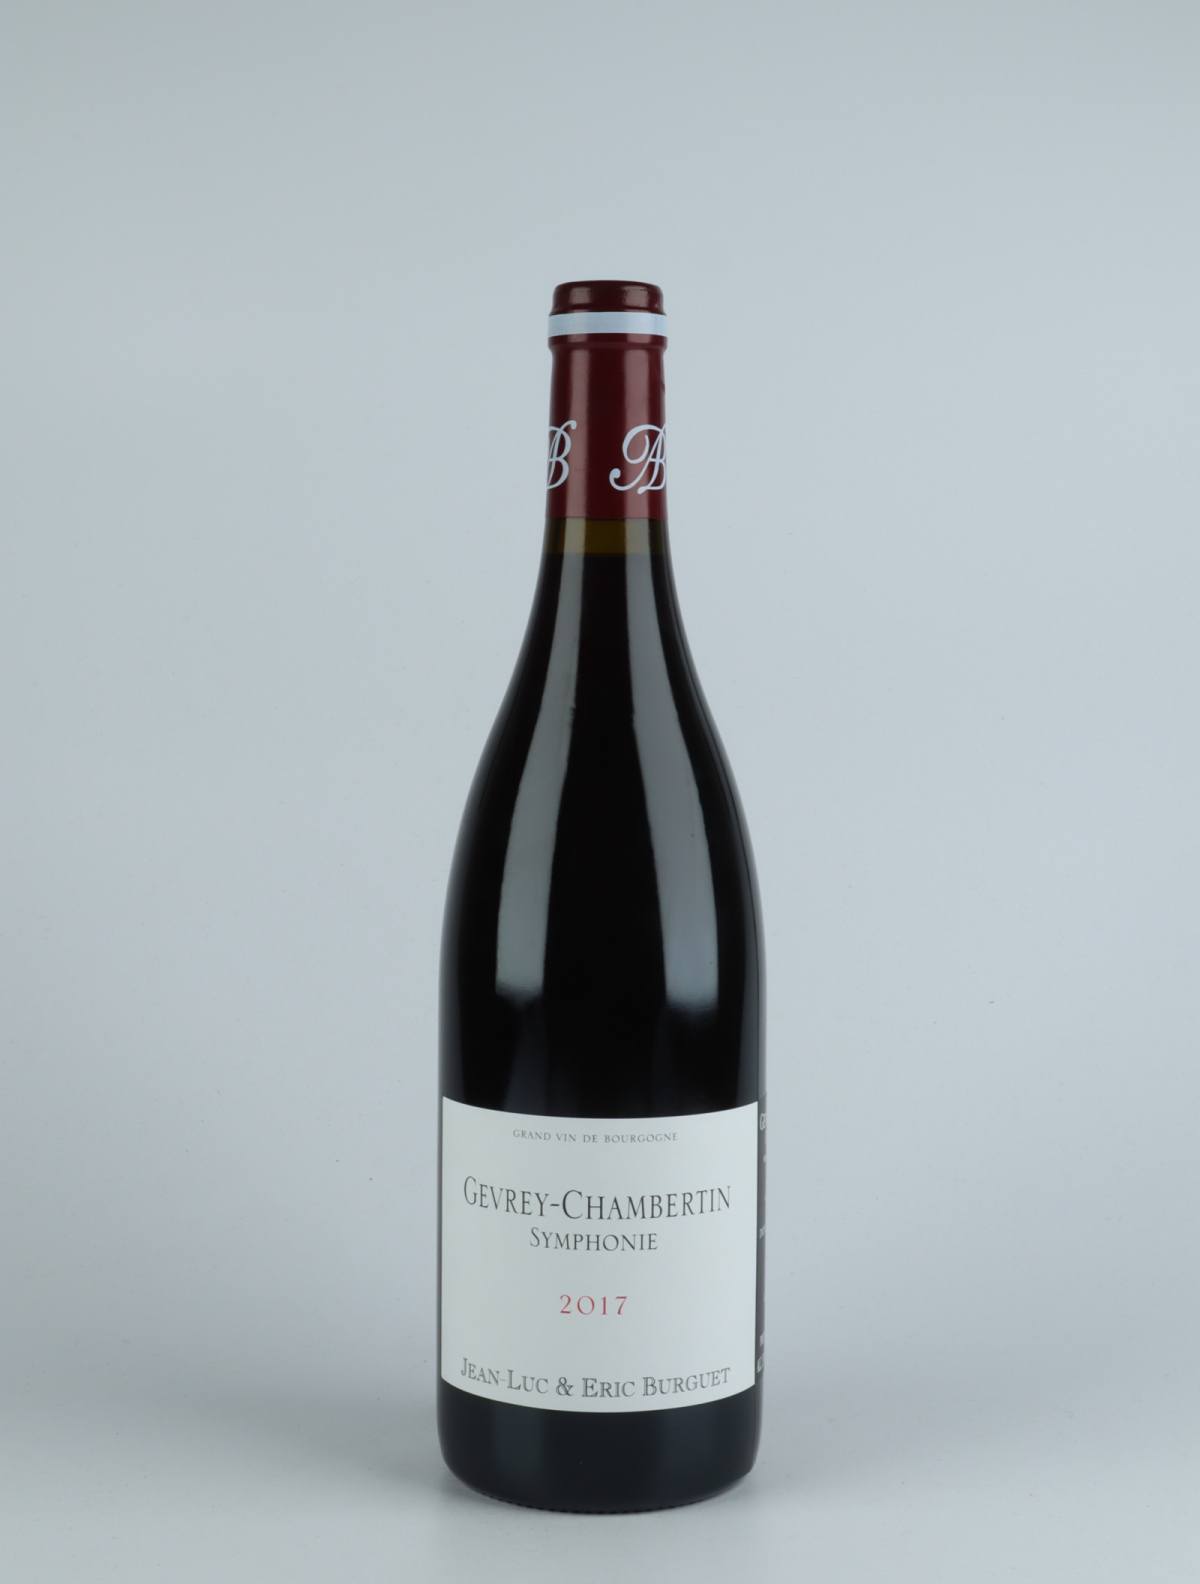 A bottle 2017 Gevrey-Chambertin - Symphonie Red wine from Jean-Luc & Eric Burguet, Burgundy in France